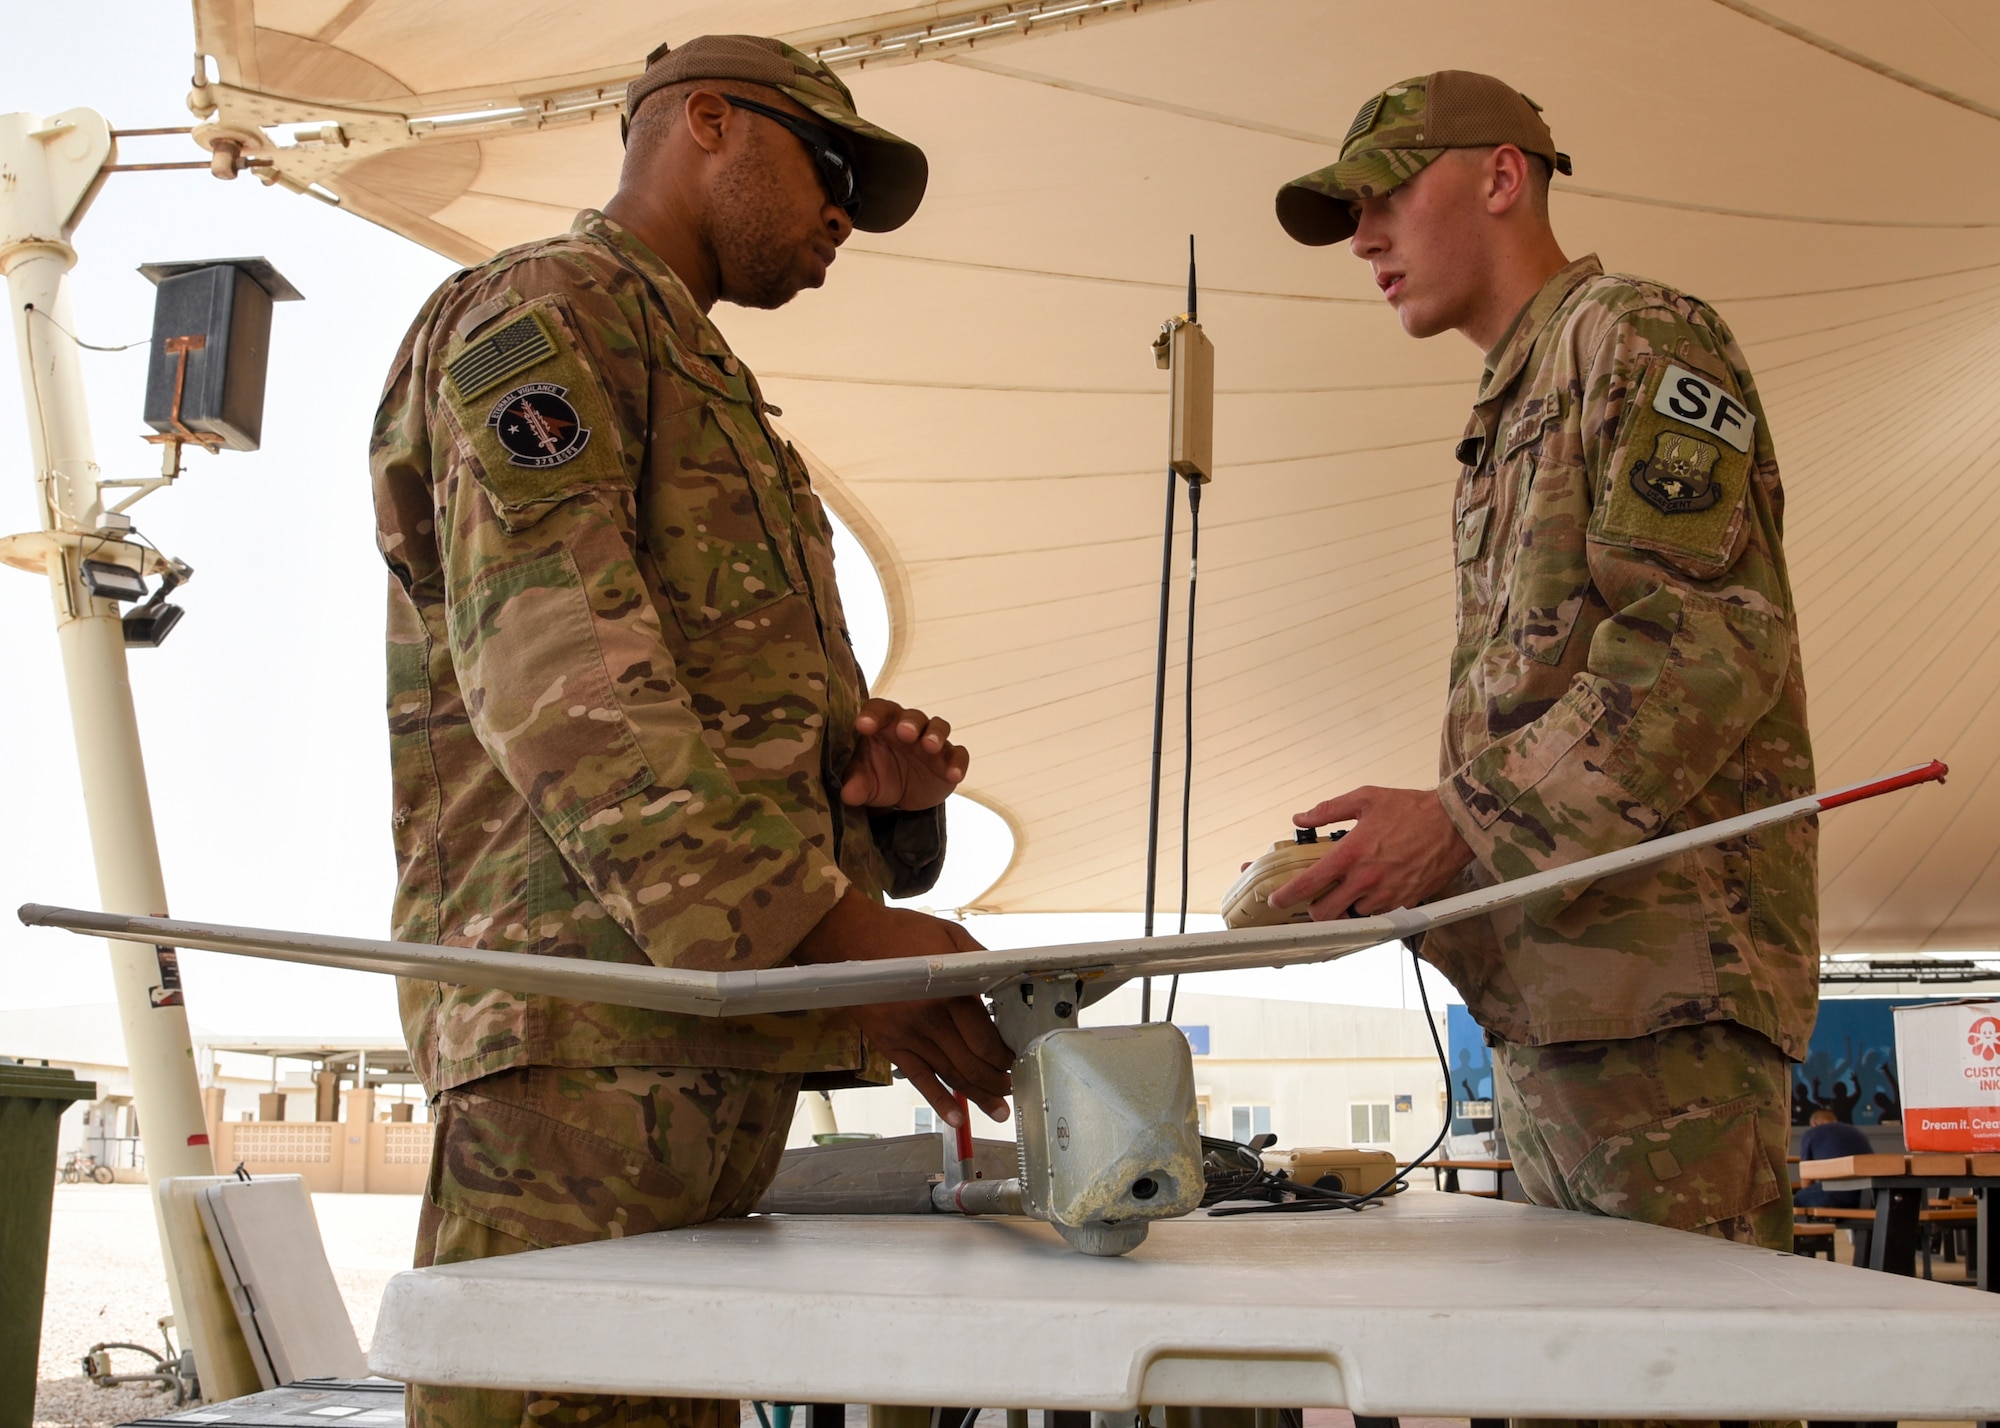 Staff Sgt. Paul Frieson (left), member of the 379th Expeditionary Security Forces Squadron, explains the capabilities of an RQ-11B, a small unmanned aircraft system, during National Police Week at Al Udeid Air Base, Qatar, May 16, 2018. The RQ-11B provides a live video feed and supports force protection efforts. (U.S. Air Force photo by Staff Sgt. Enjoli Saunders)